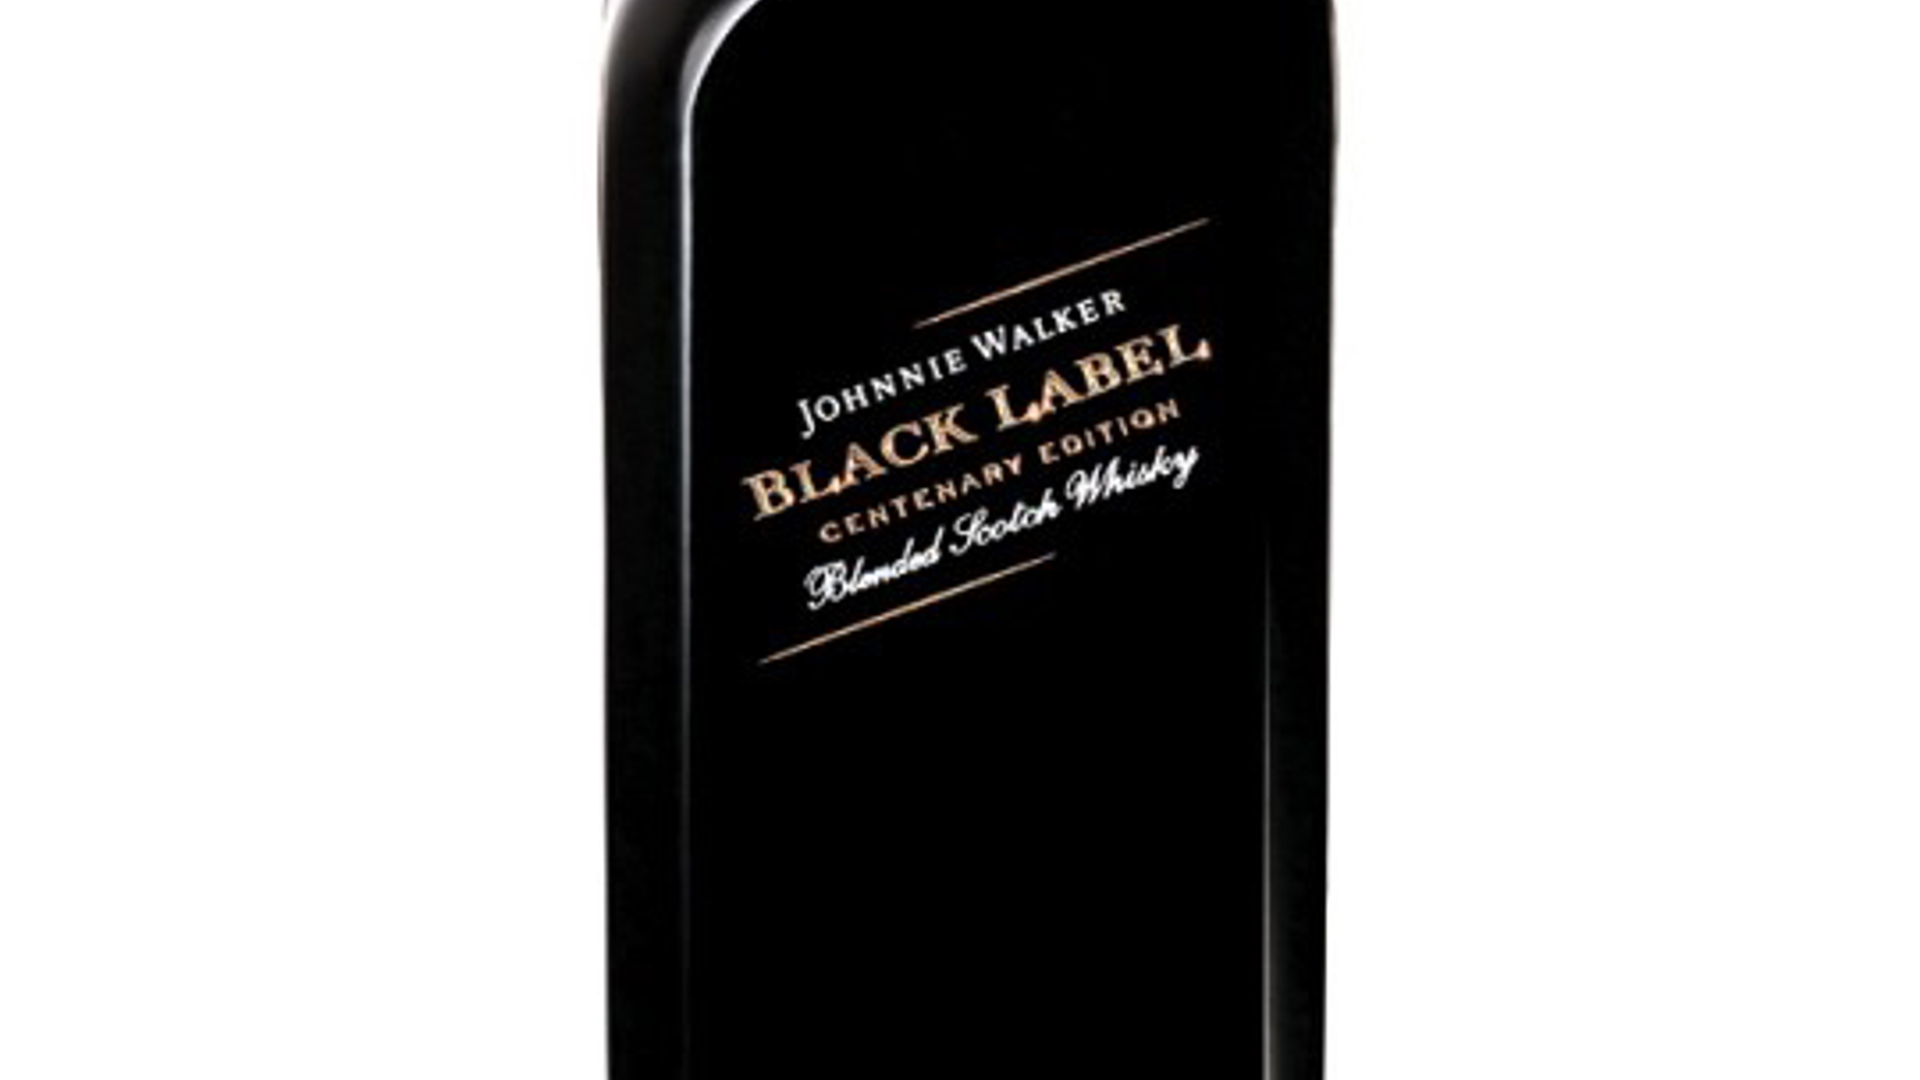 Featured image for Johnnie Walker Black Label 100th Anniversary